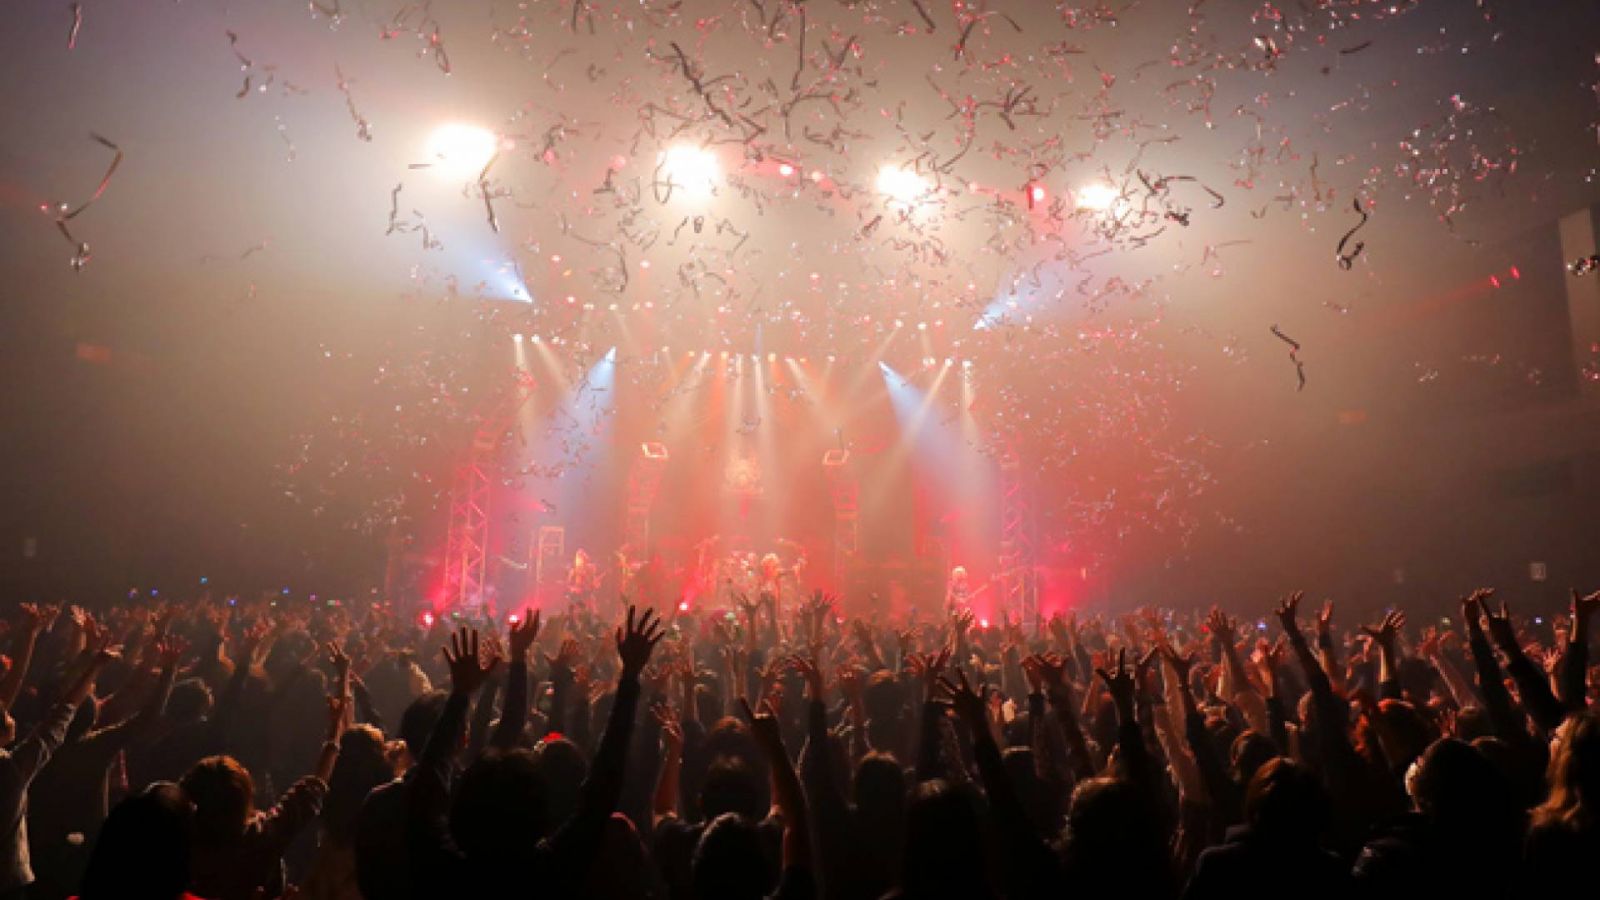 Versailles 10th Anniversary Tour -Grand Finale- “CHATEAU DE VERSAILLES” at Zepp Tokyo © CHATEAU AGENCY CO., Ltd. All rights reserved.